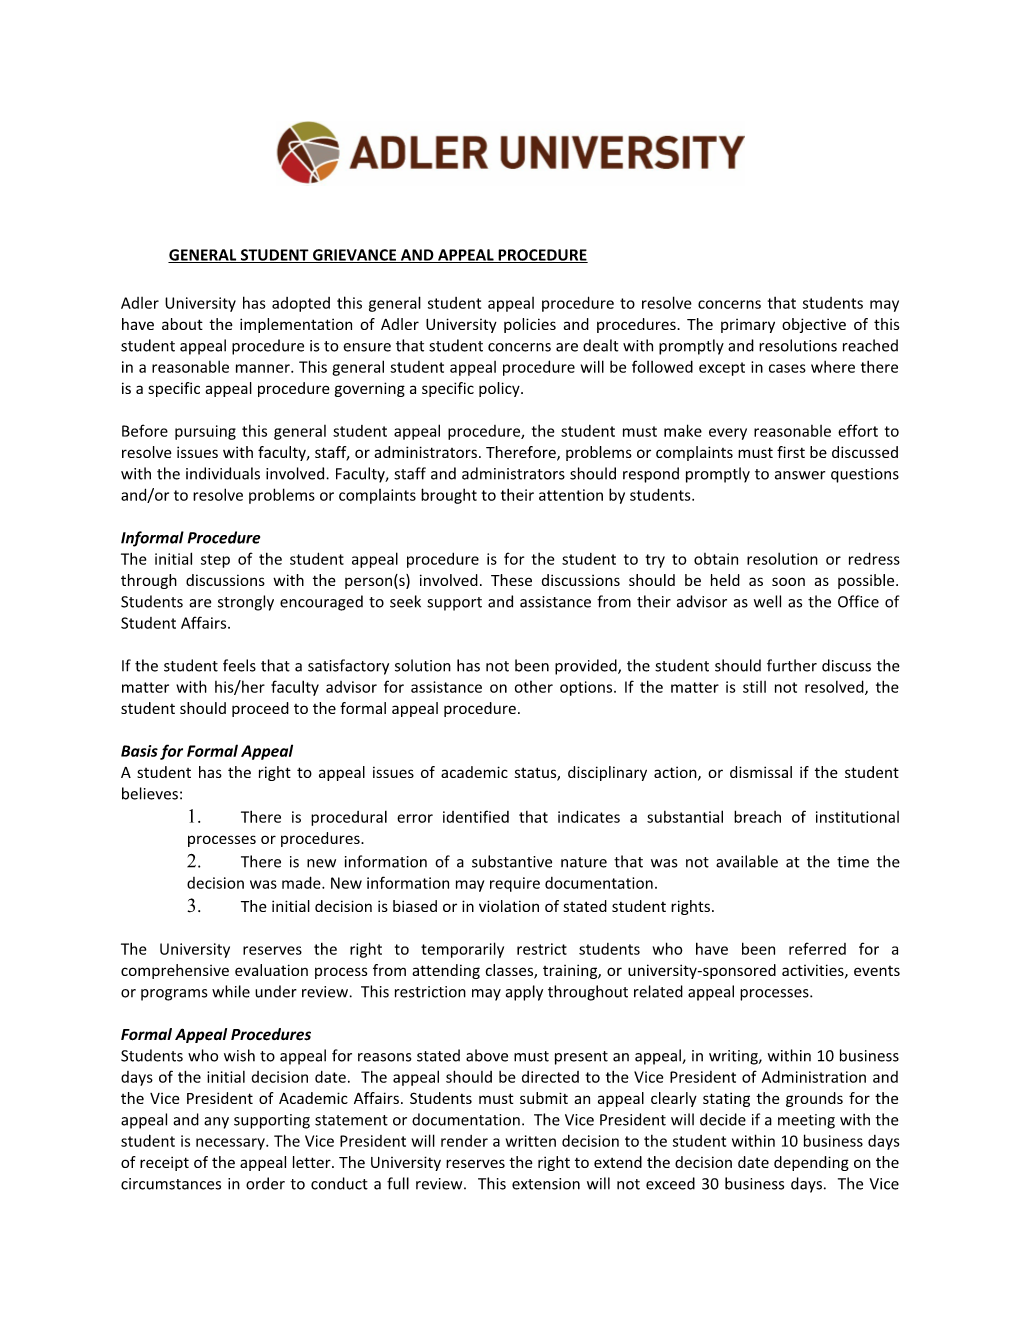 General Student Grievance and Appeal Procedure